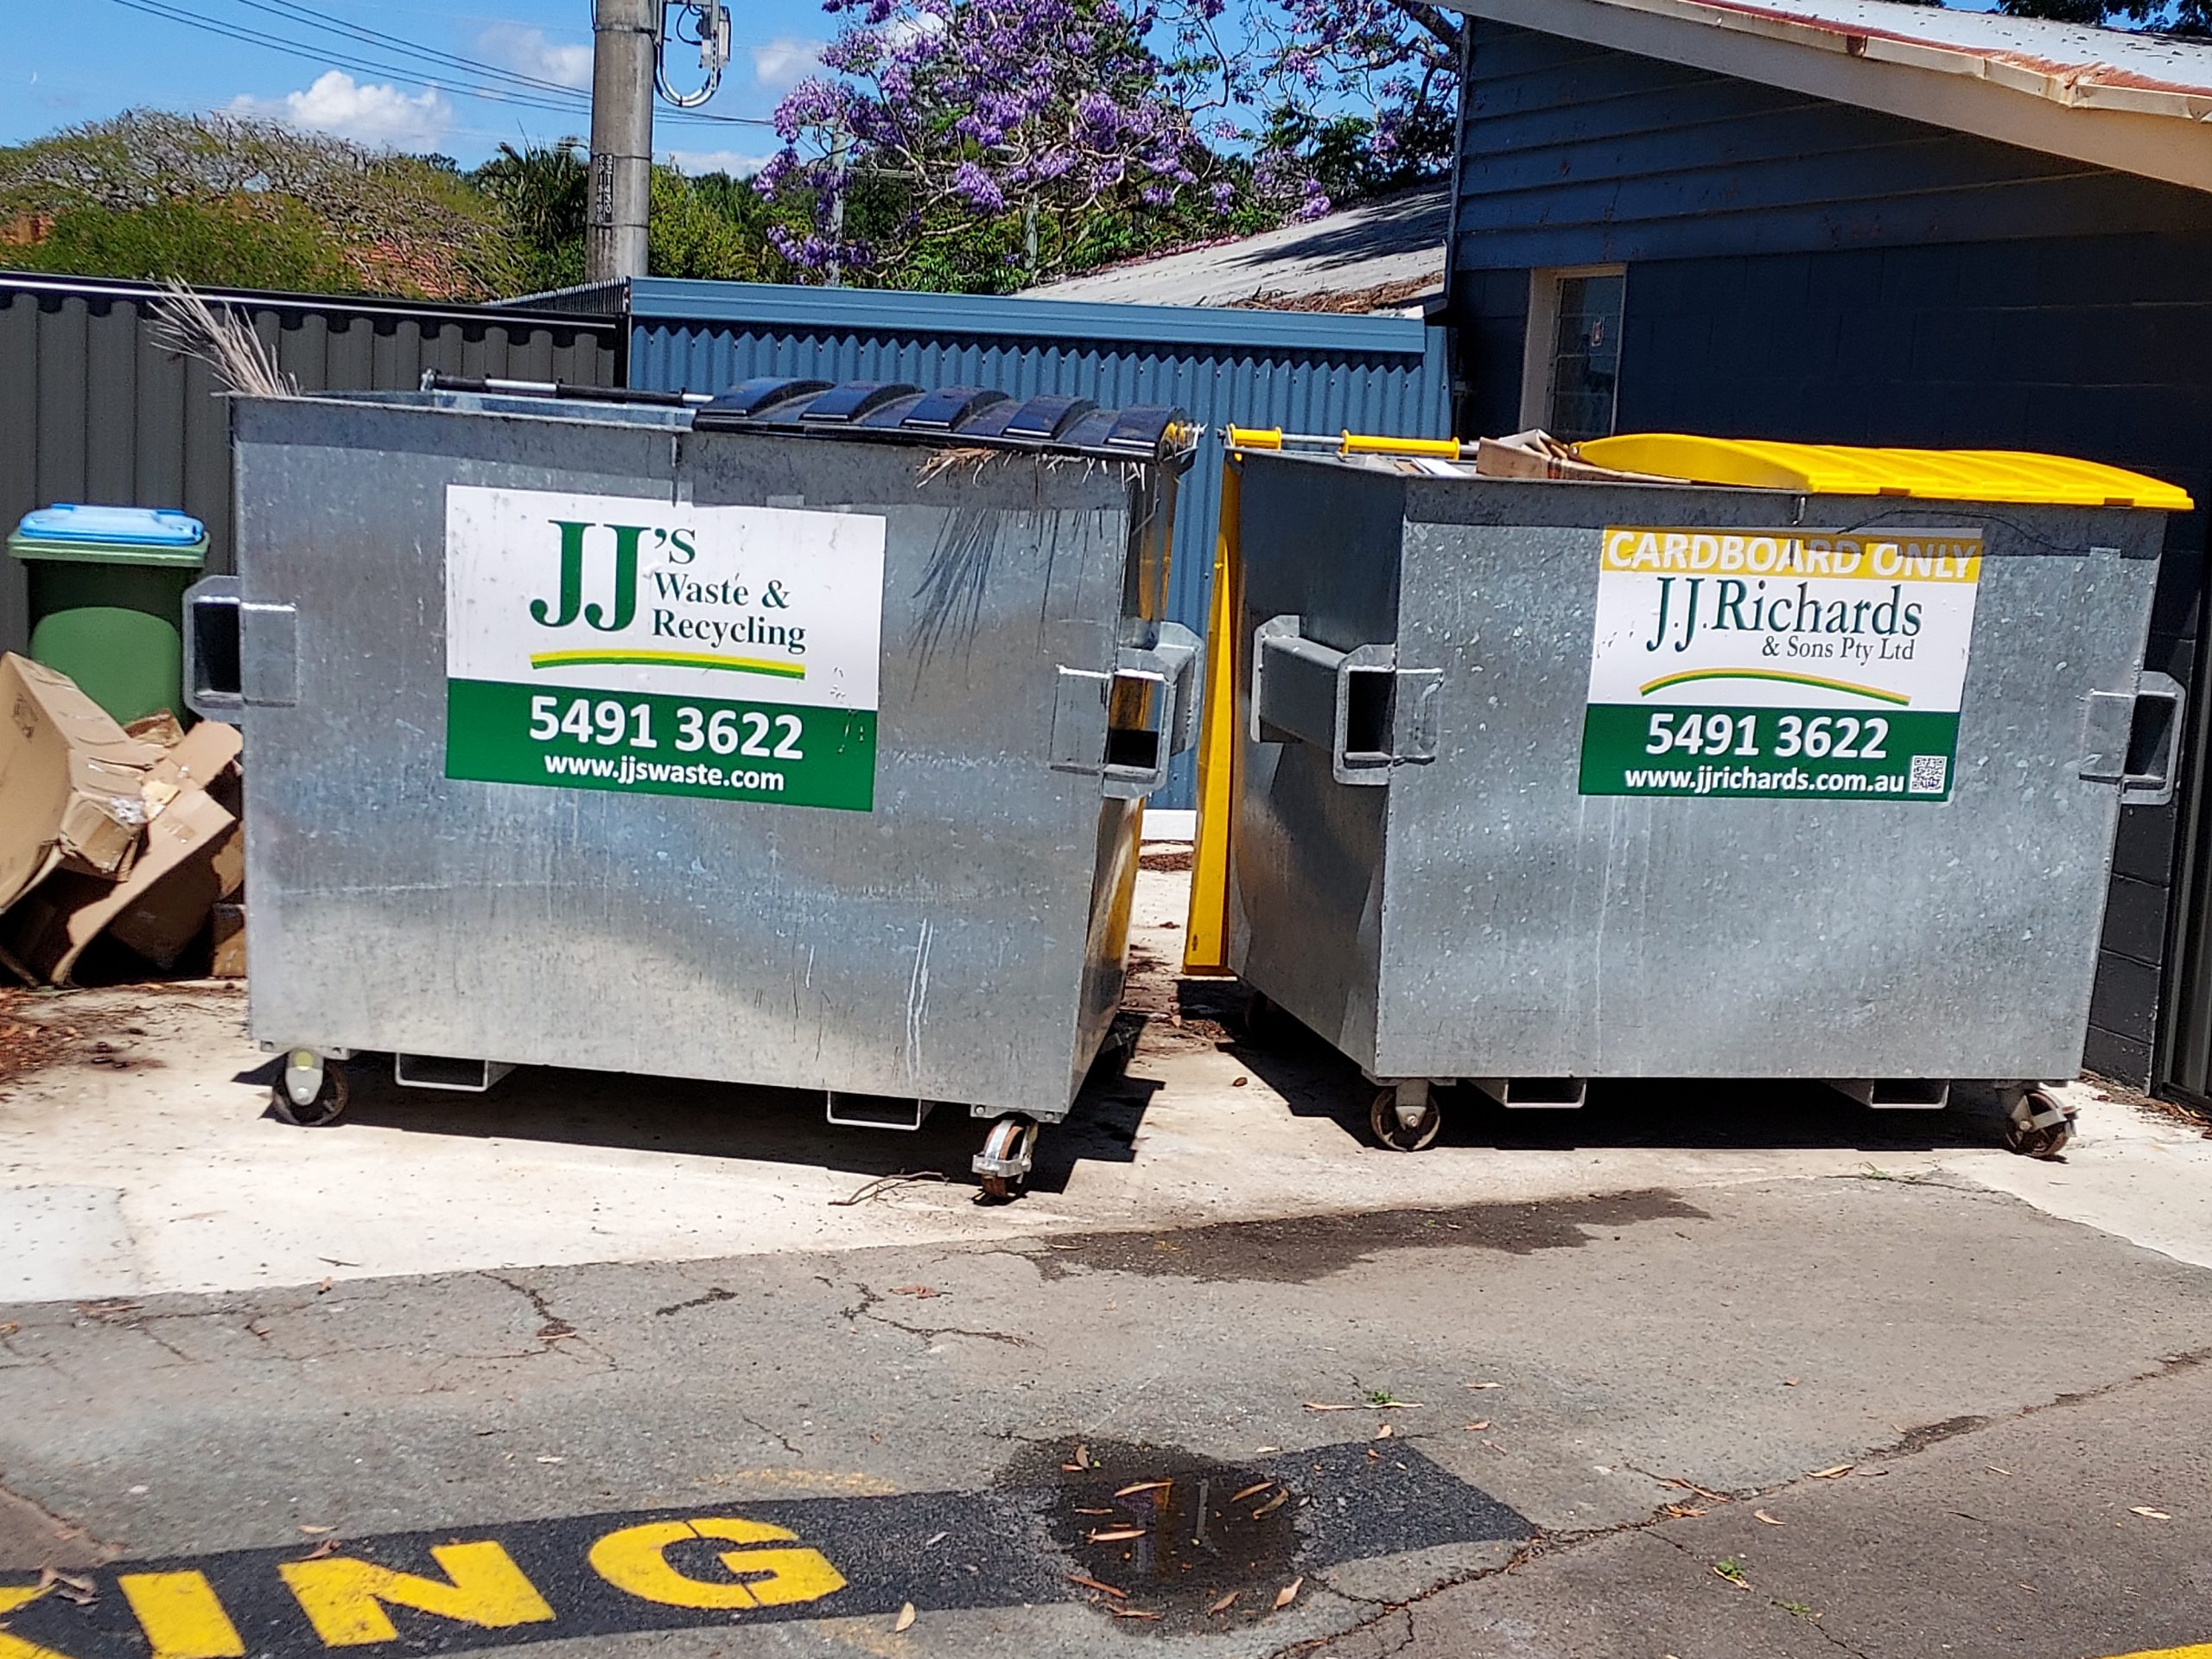 Waste Recycling Gympie And District Sustainability Alliance Gadsa